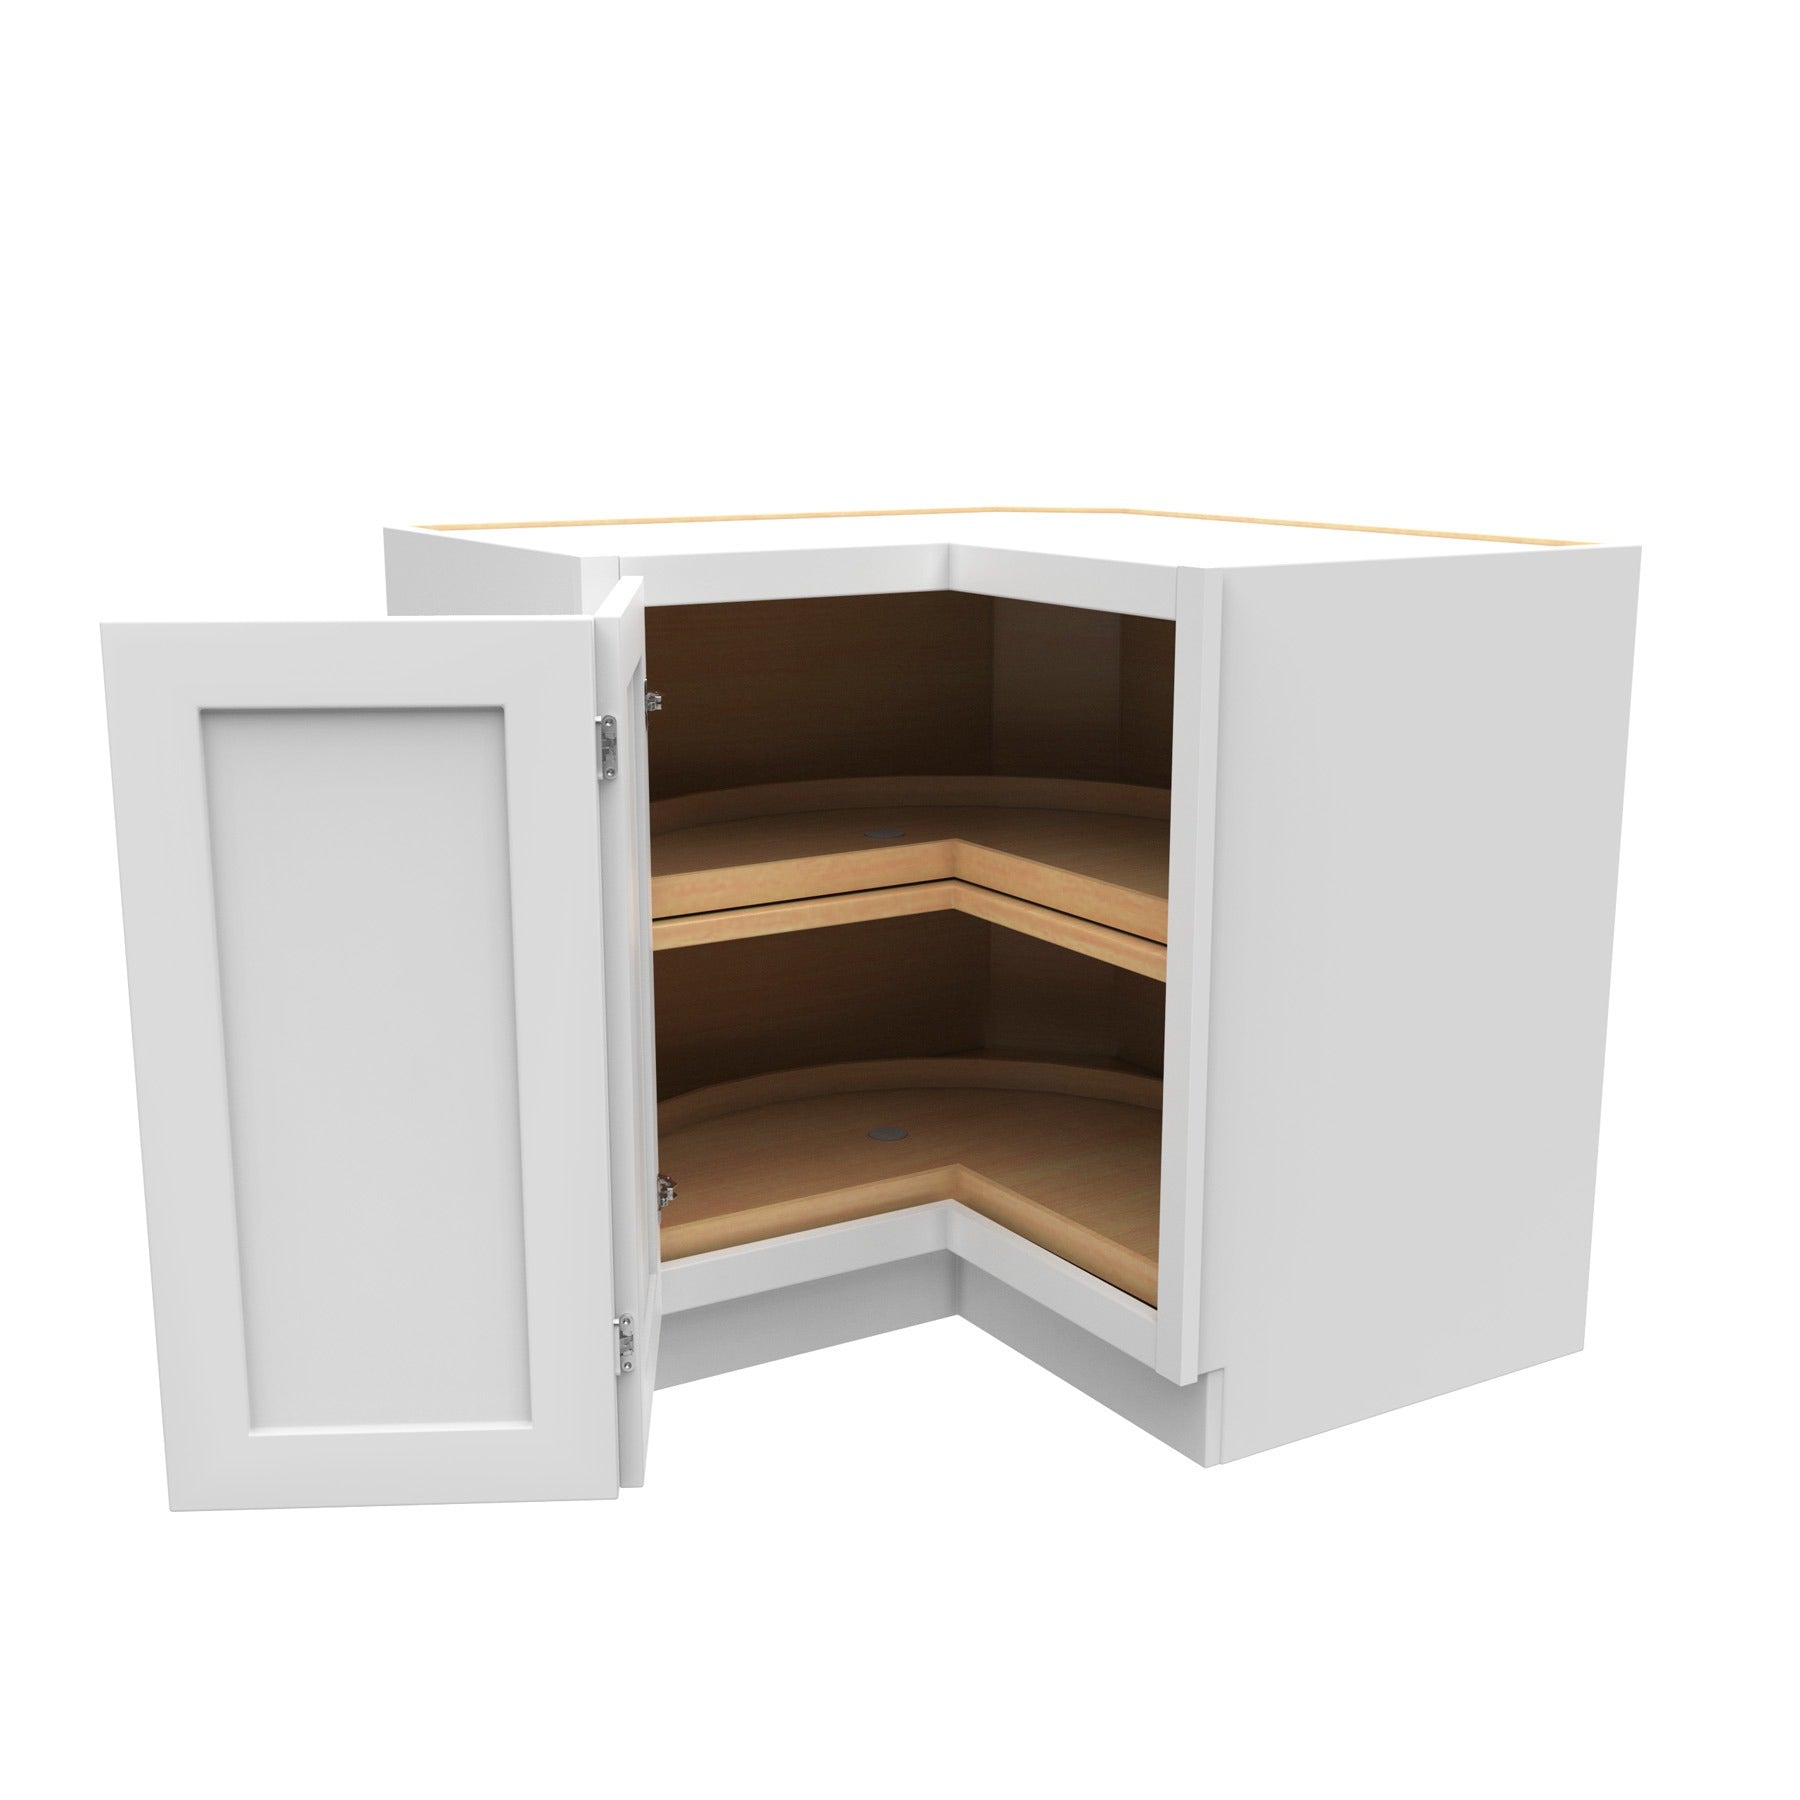 36 Inch Wide Lazy Susan Corner Base Cabinet - Luxor White Shaker - Ready To Assemble, 36"W x 34.5"H x 24"D